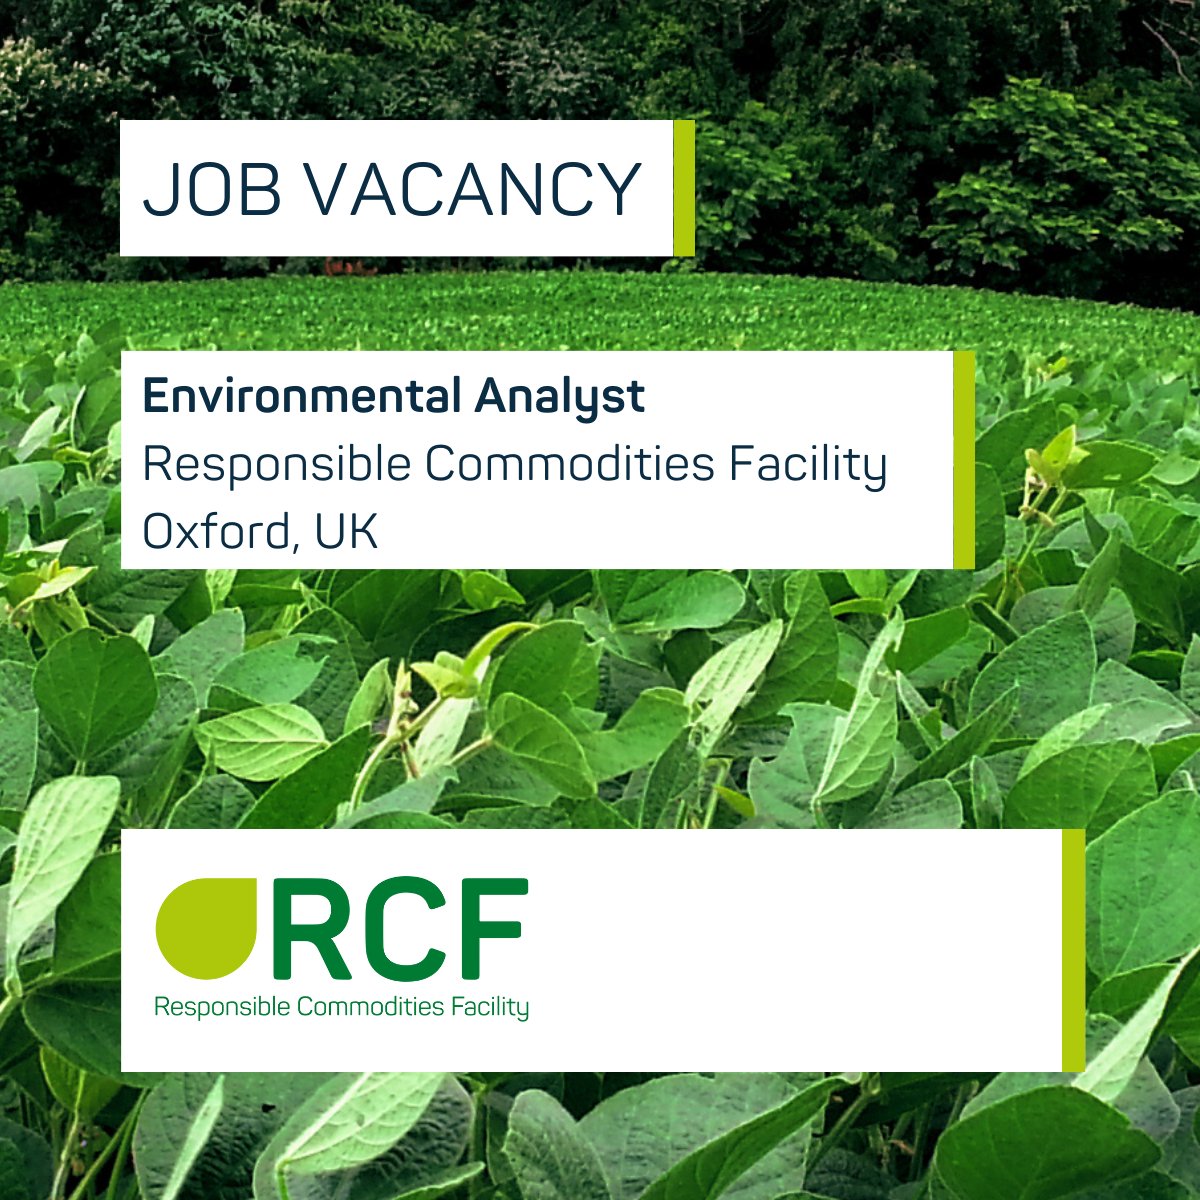 CLOSES 30th April - apply without delay!

We are looking for a Environmental Analyst to join our team based in Oxford - UK.

Full details: sim.finance/2024/04/10/job…

#greenjobs #jobswithpurpose #environmentjobs #oxfordjobs #forestprotection